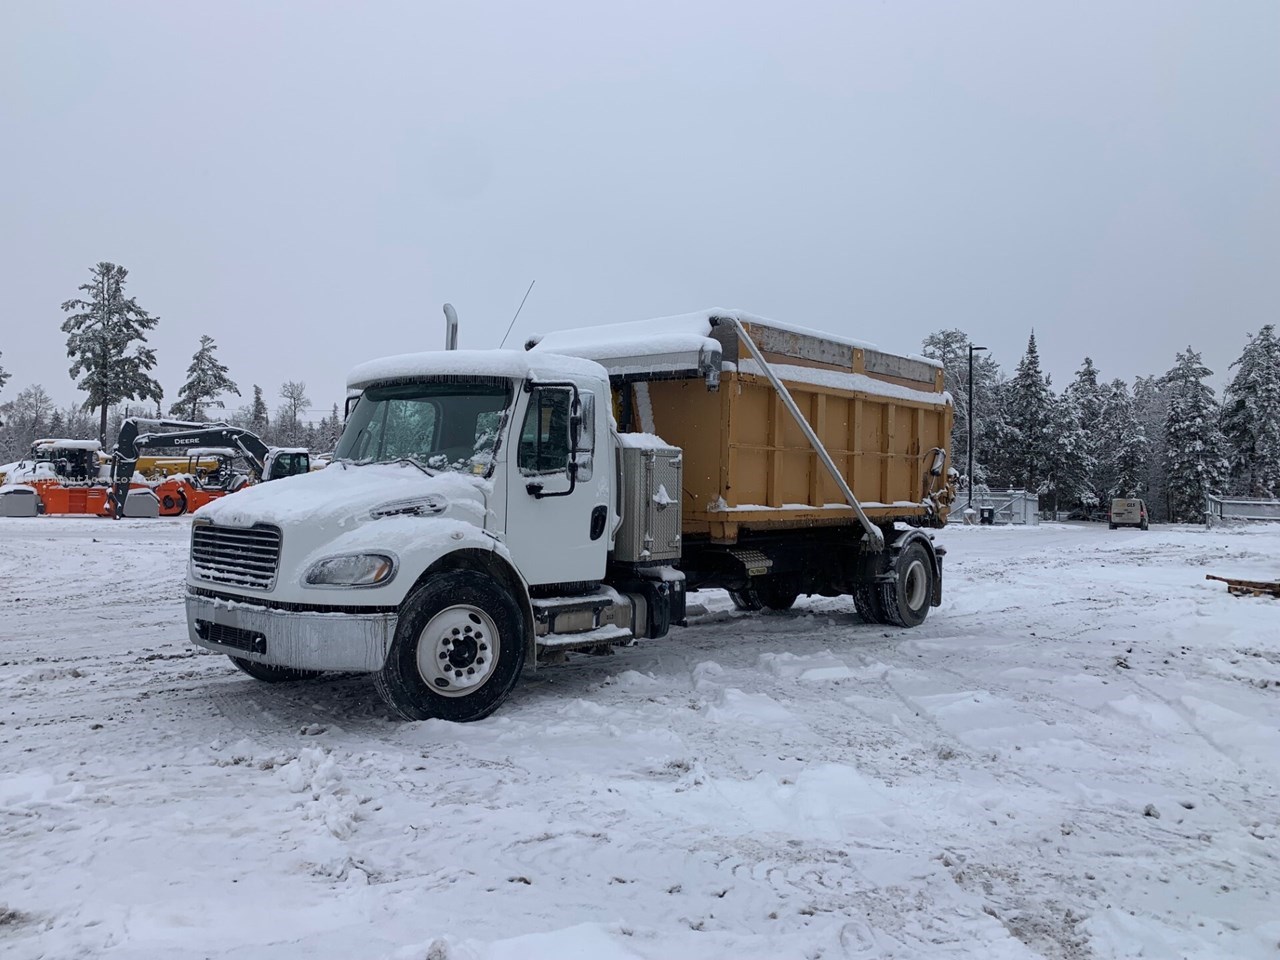 2019 Miscellaneous TRUCK Image 1